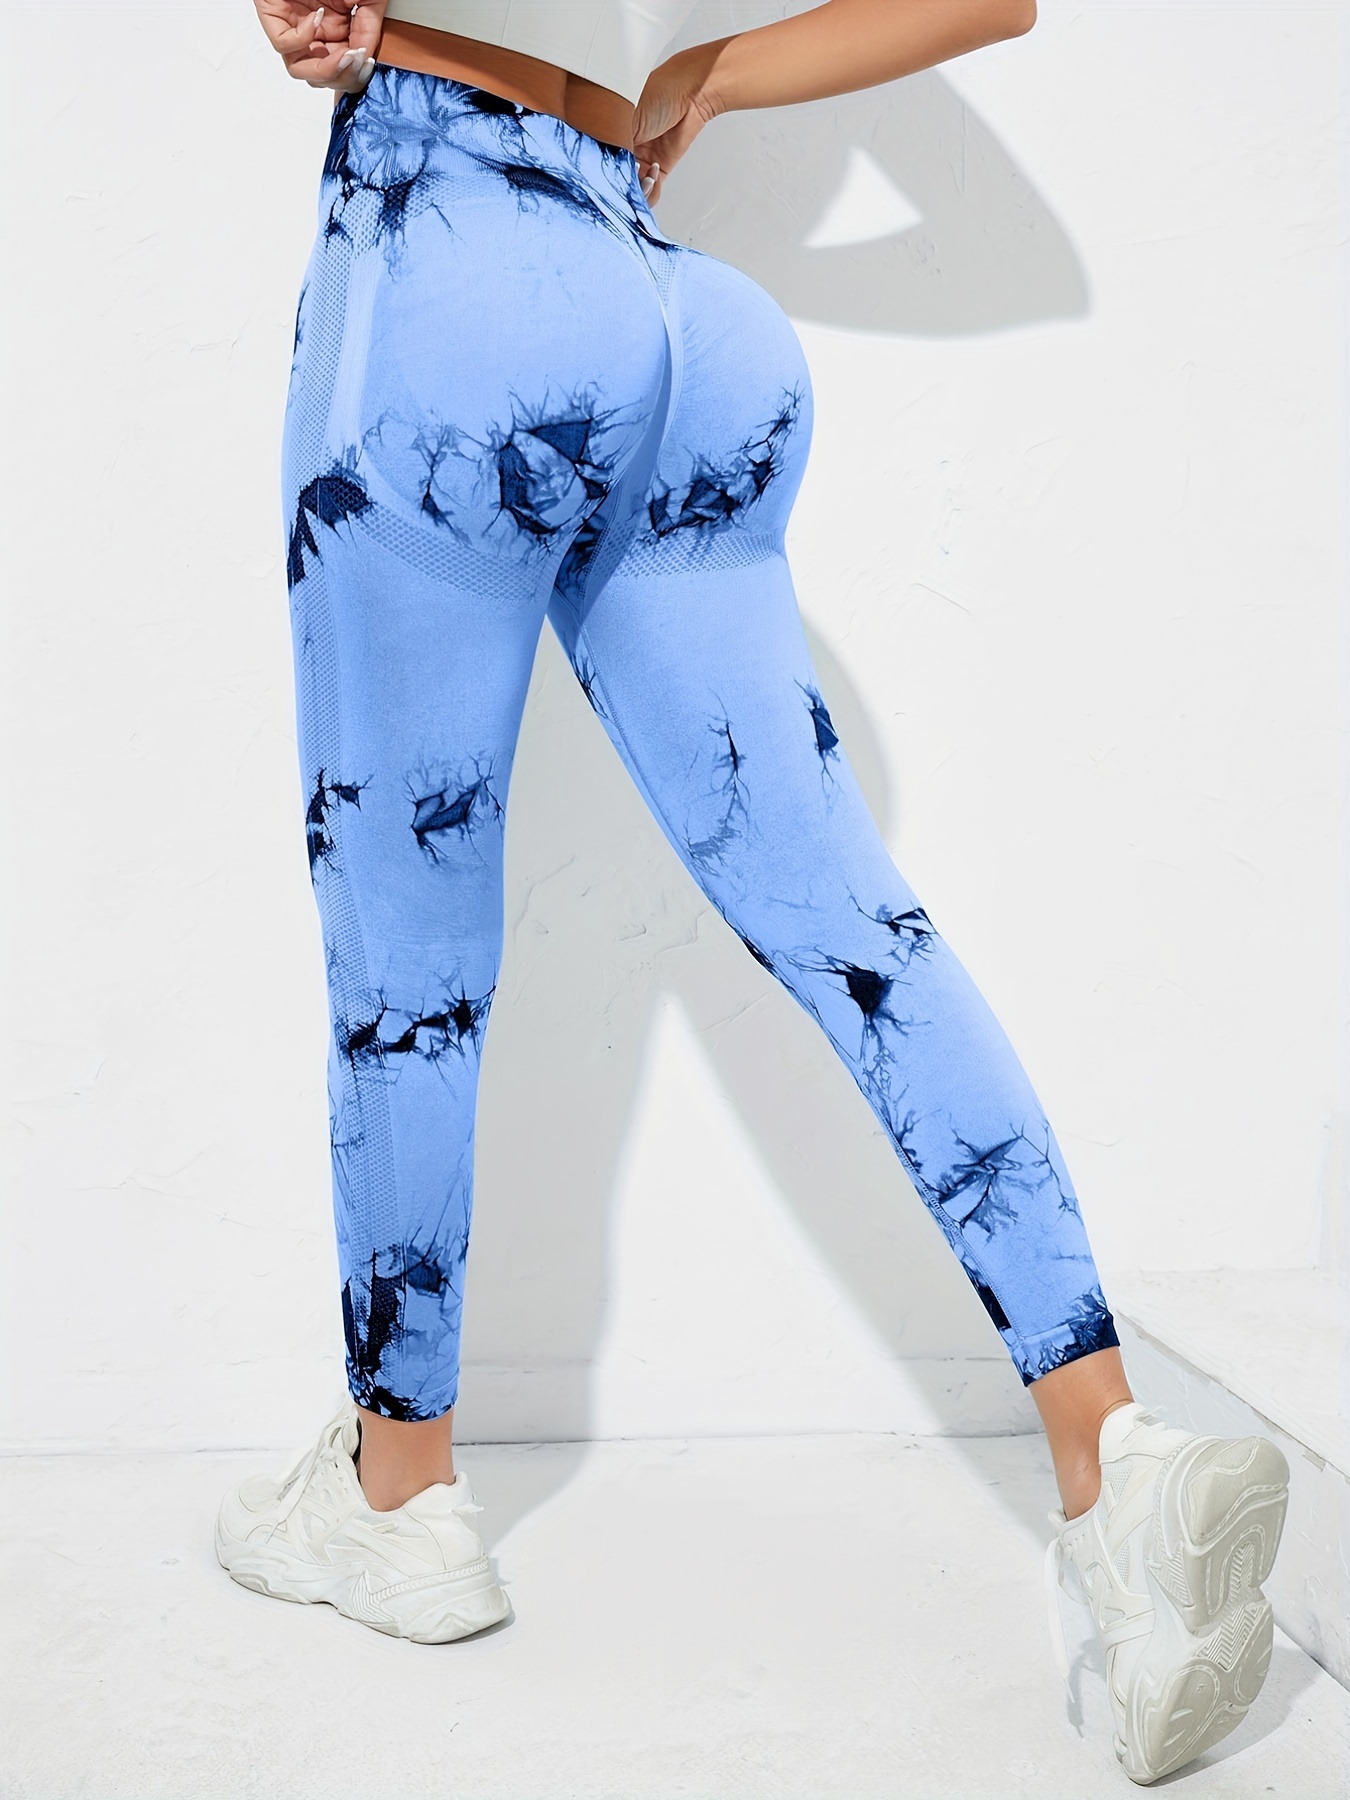 Sexy Seamless Leggings Women Fitness Gym Clothing Tie Dye Sports Pants High  Waisted Push Up Leggings